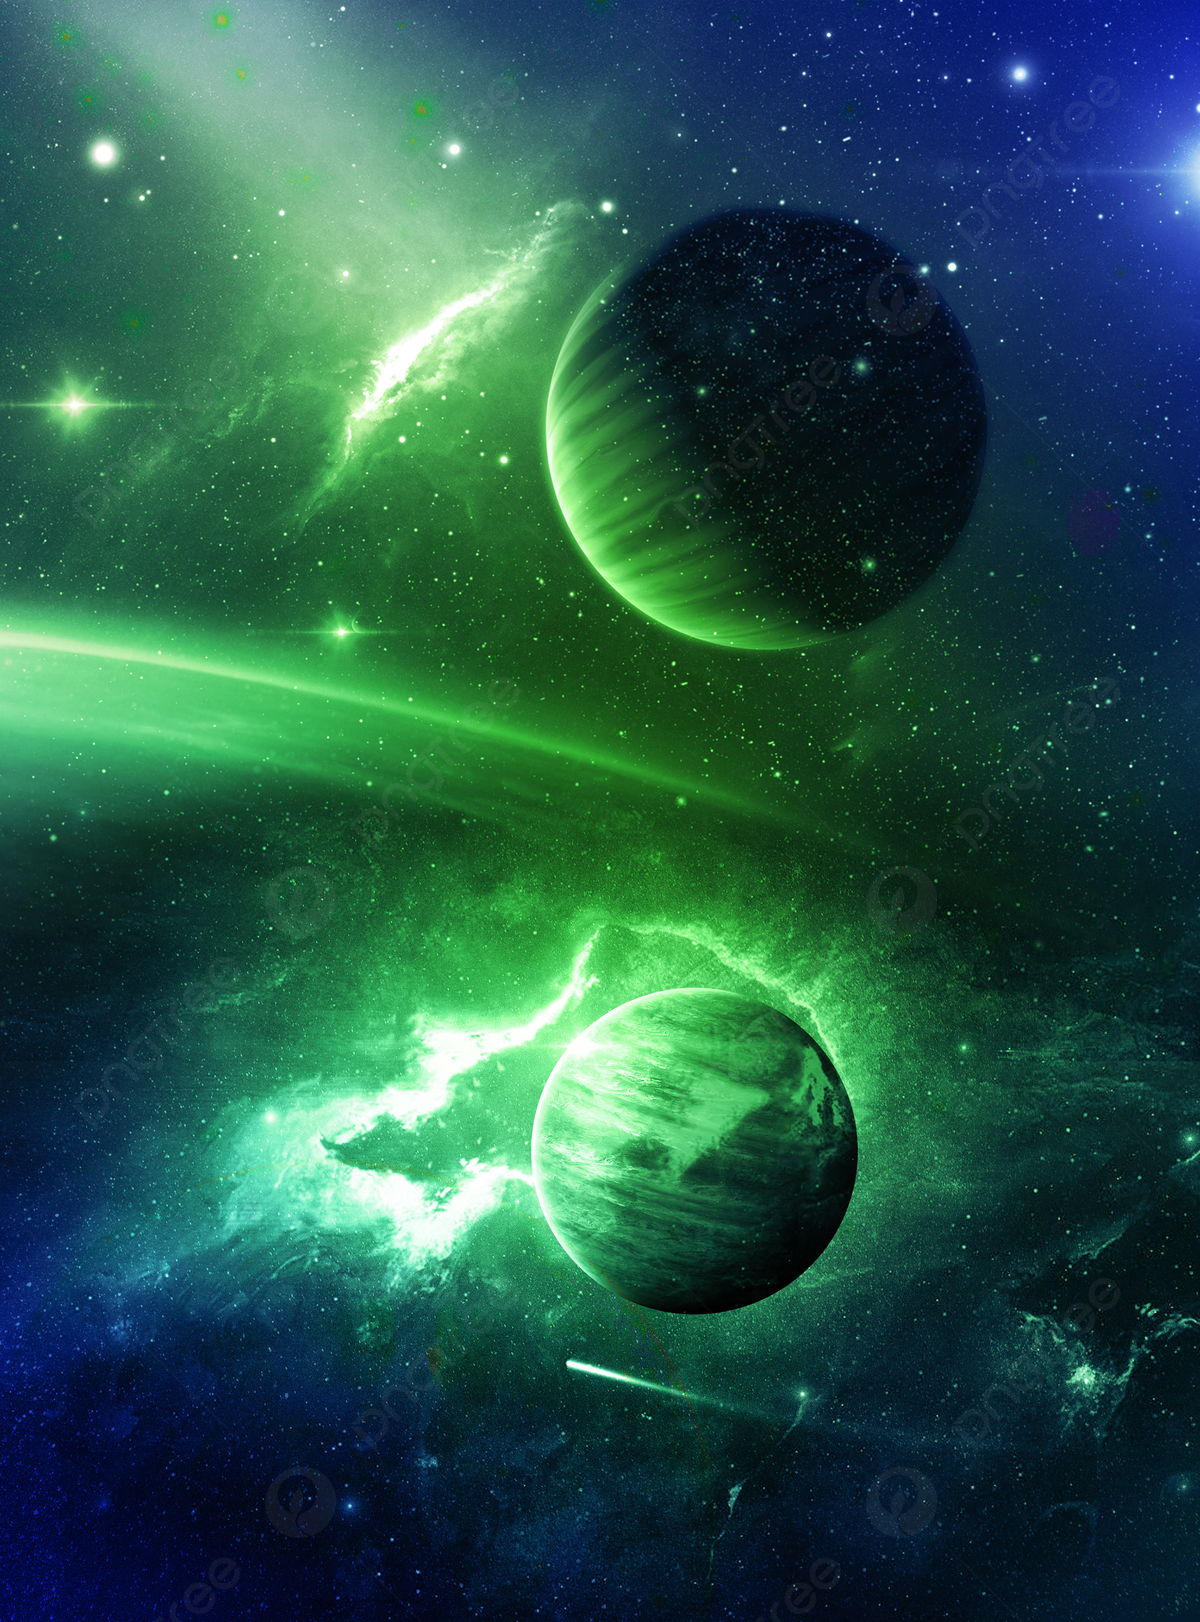 Science Fiction Green Planet Background Material Wallpaper Image For Free Download